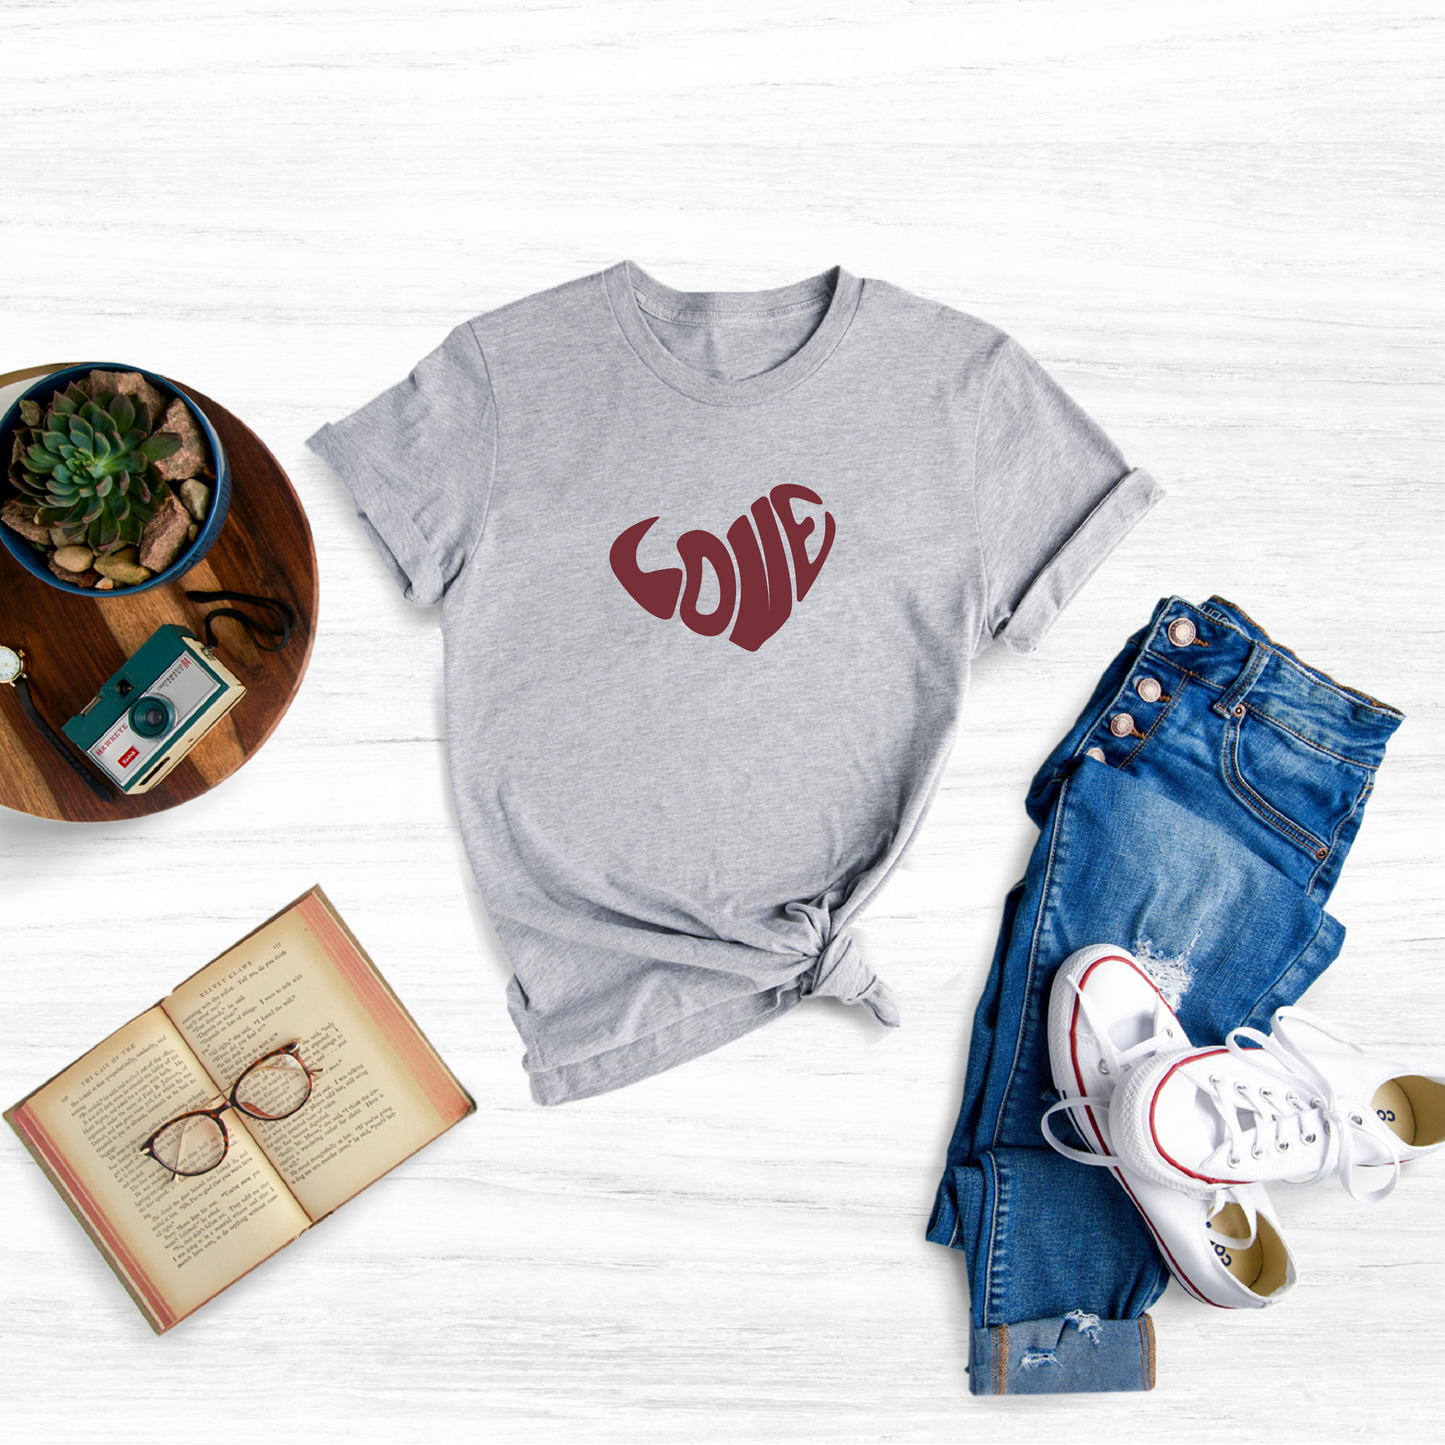 A vibrant Valentine's Day shirt featuring a classic retro heart design and love-themed message.